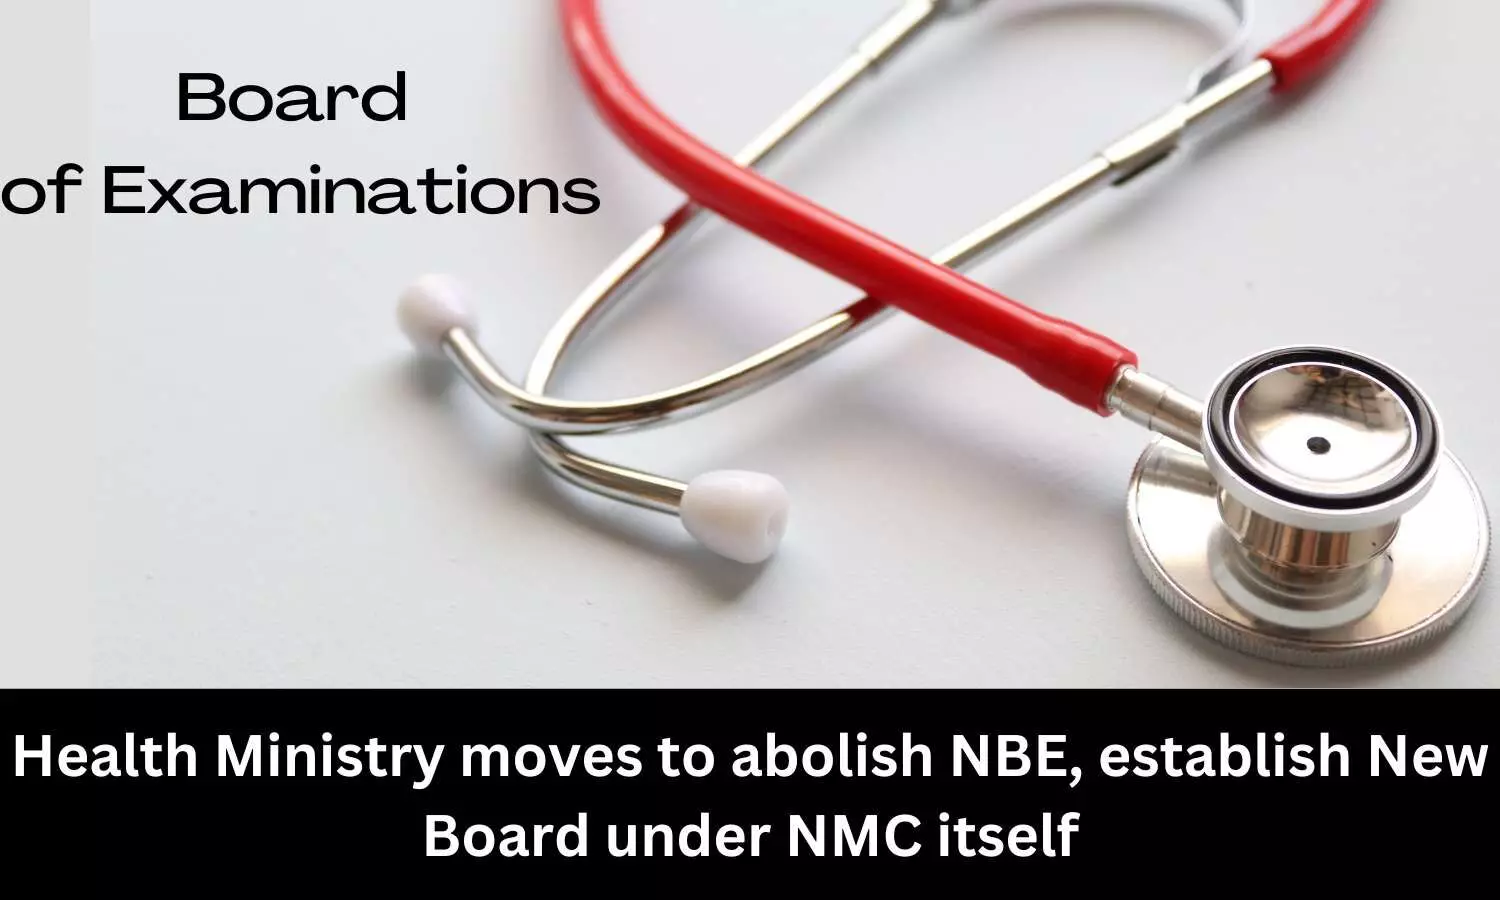 Health Ministry proposes to establish new board under NMC in lieu of NBE